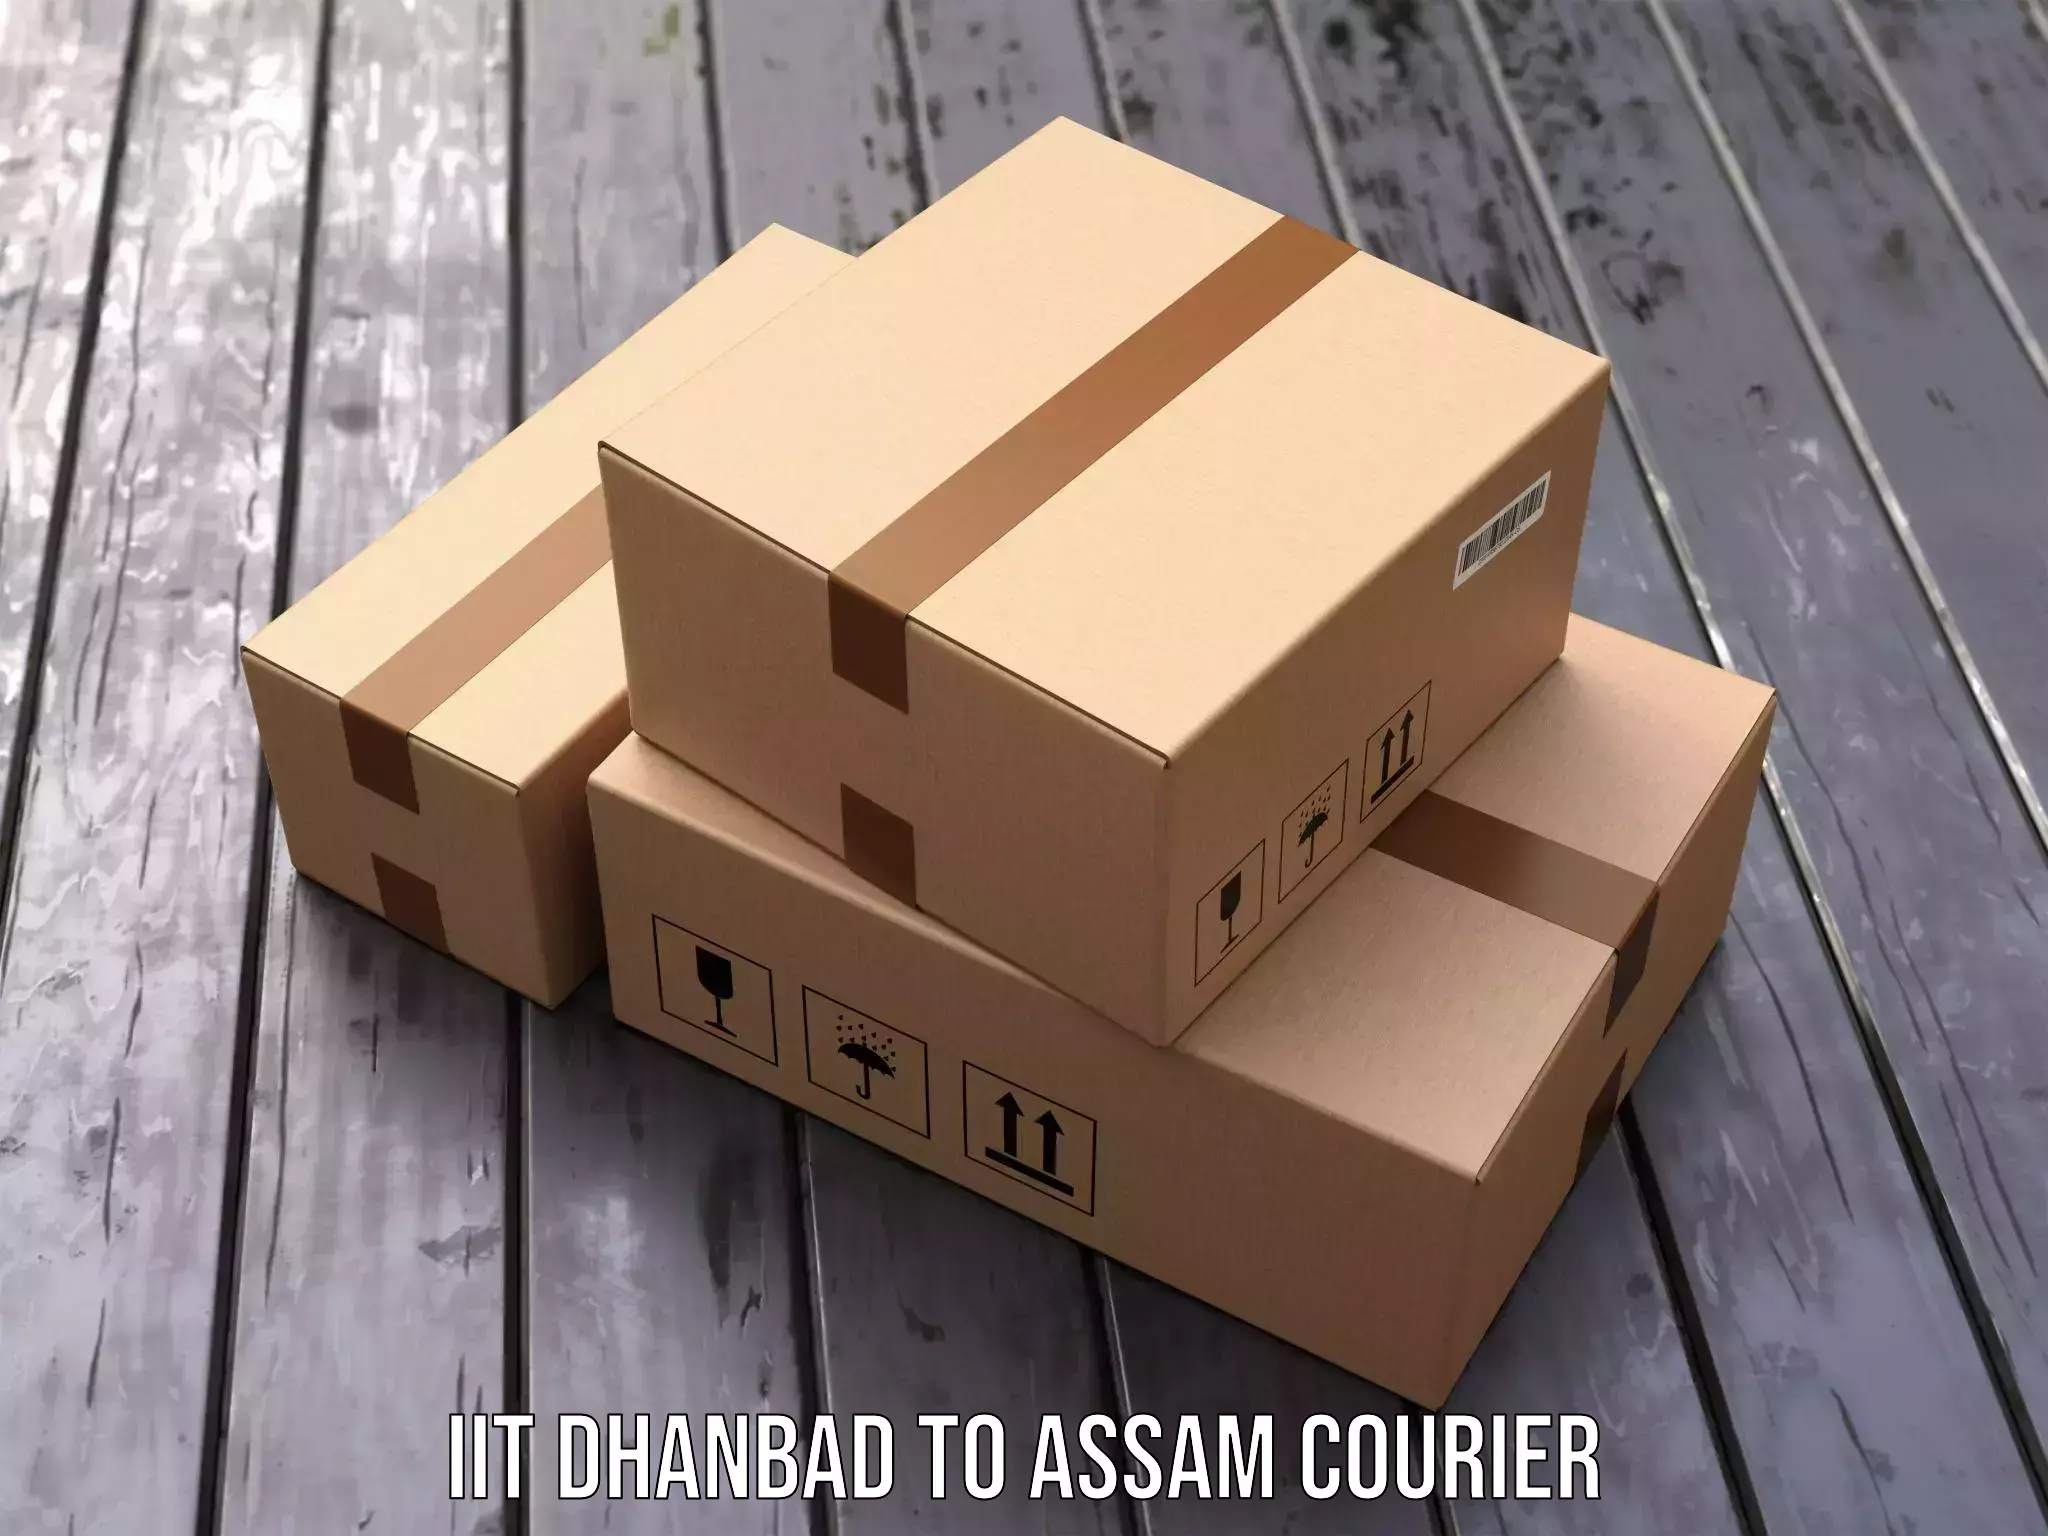 24/7 courier service IIT Dhanbad to Dibrugarh University